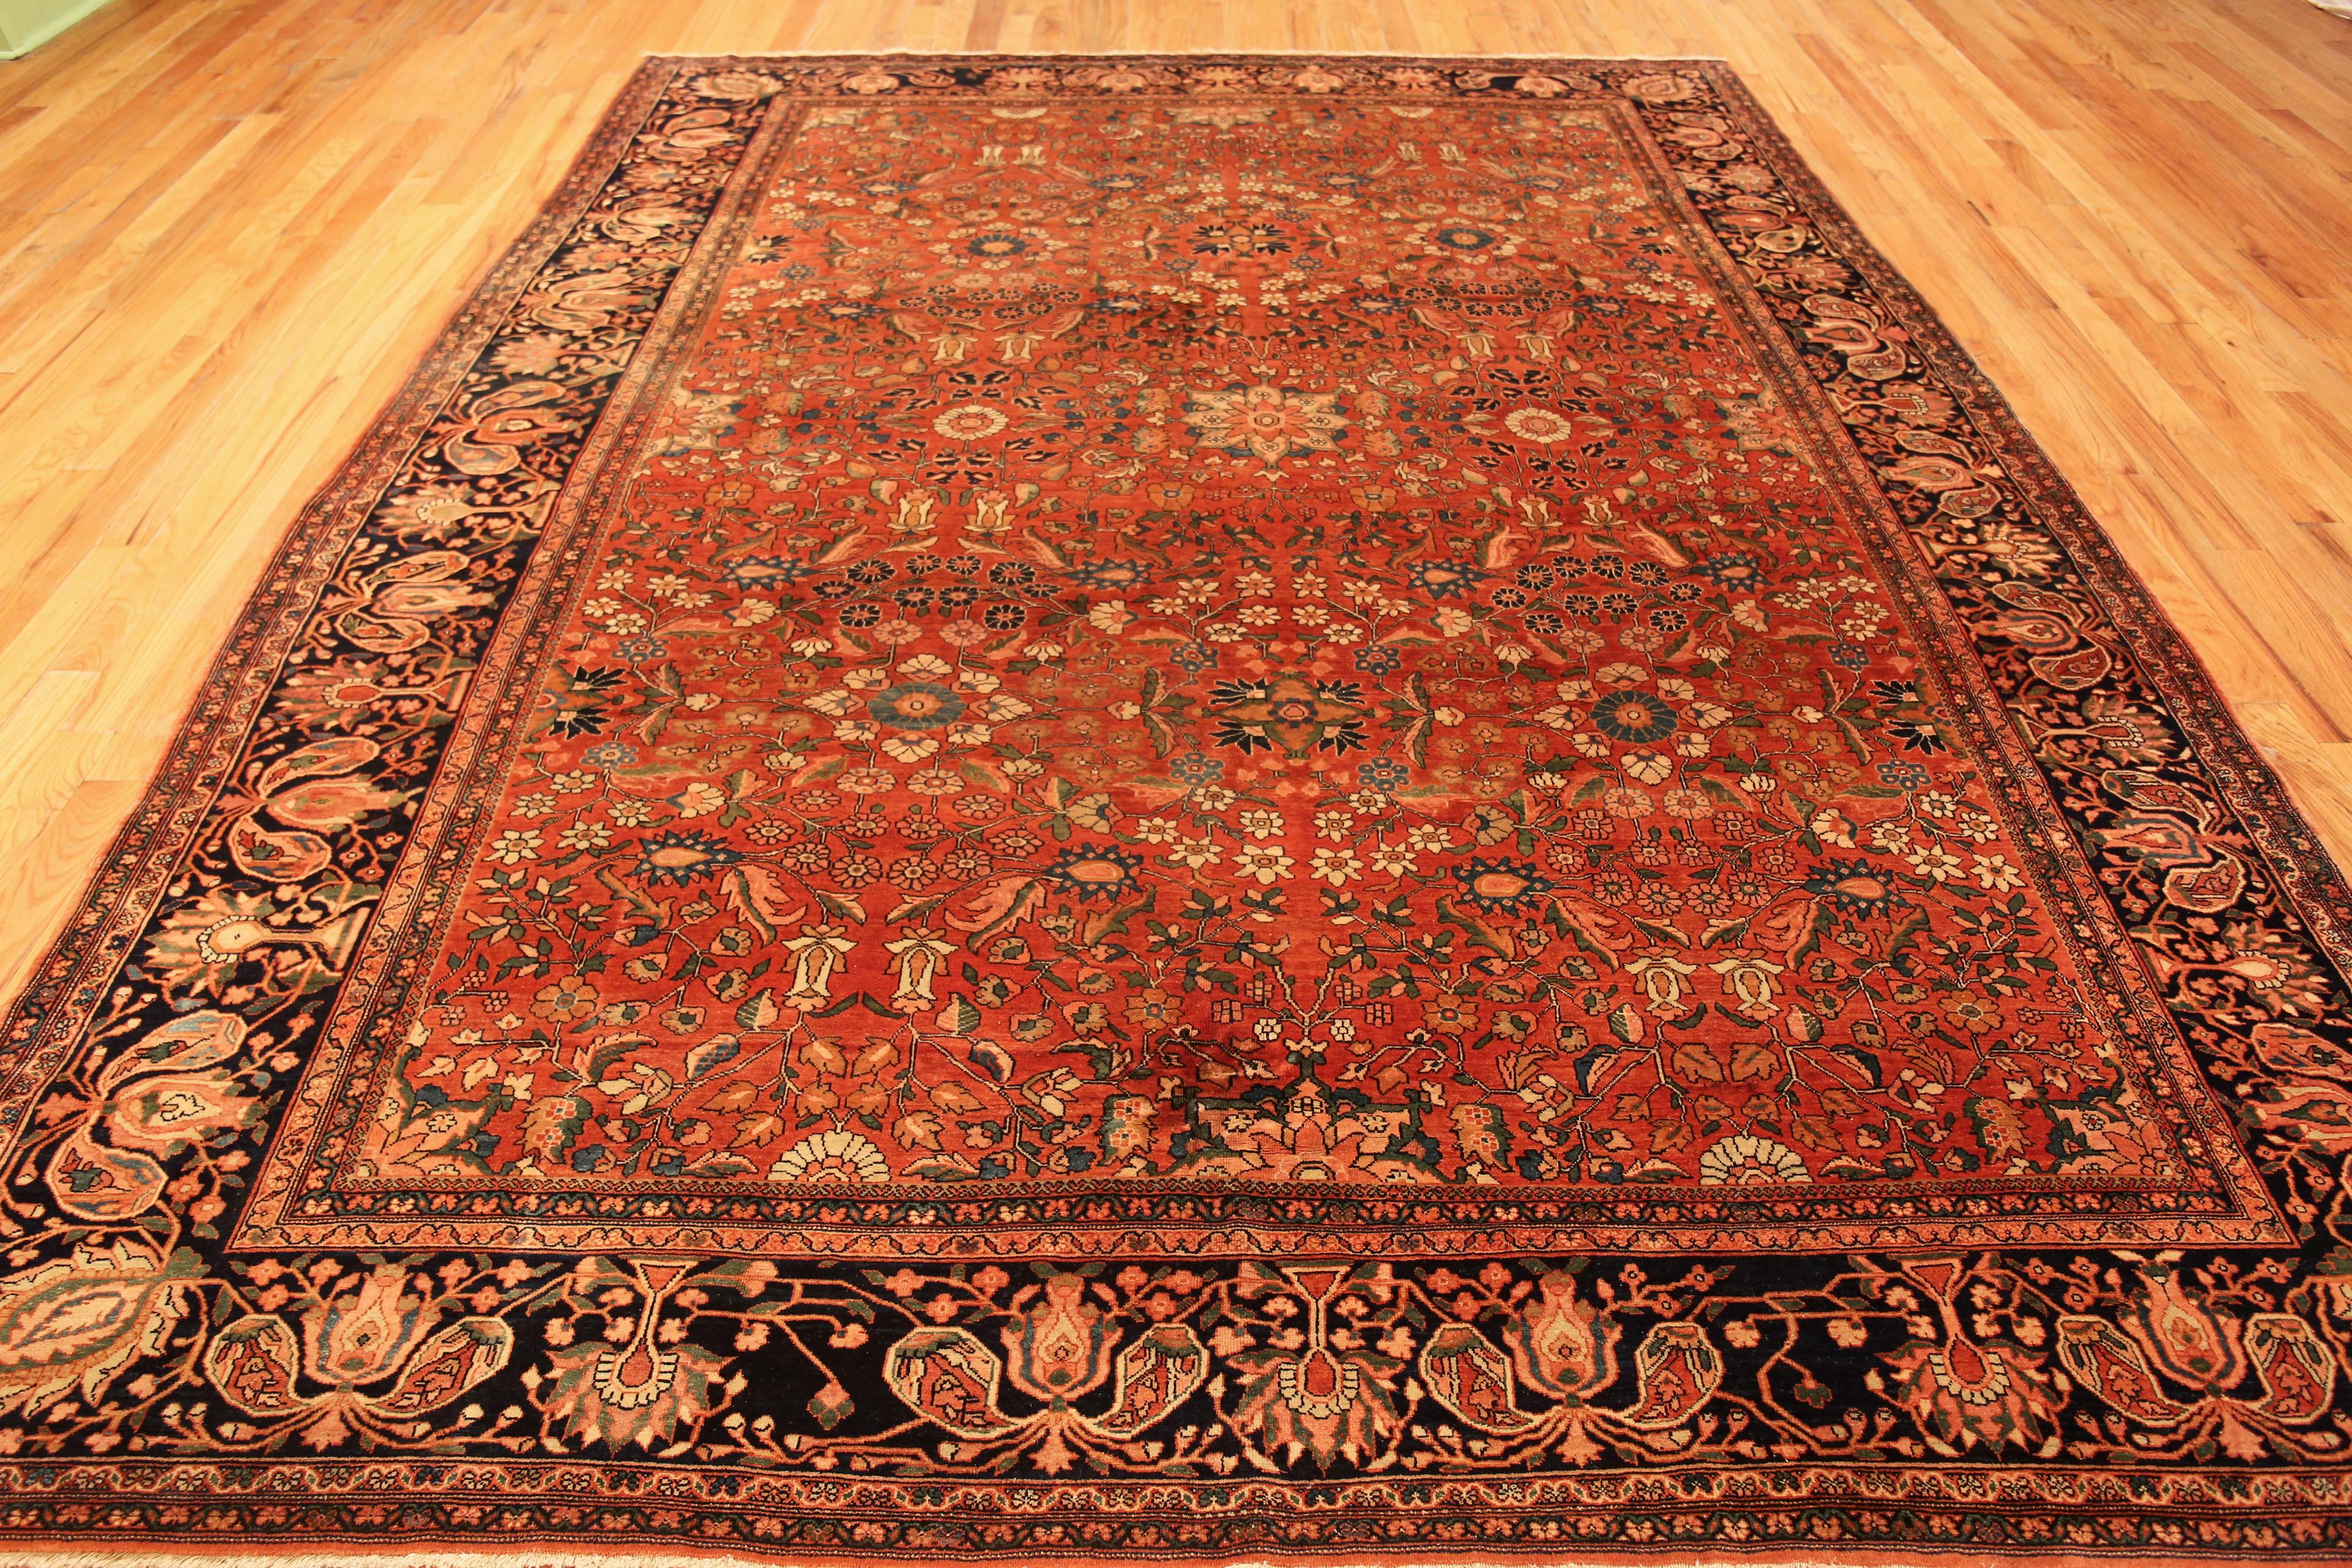 Luxurious Fine Rustic Antique Persian Sarouk Farahan Allover Design Area Rug, Country of origin: Persia, Circa date: 1880. Size: 9 ft 3 in x 11 ft 6 in (2.82 m x 3.51 m)

